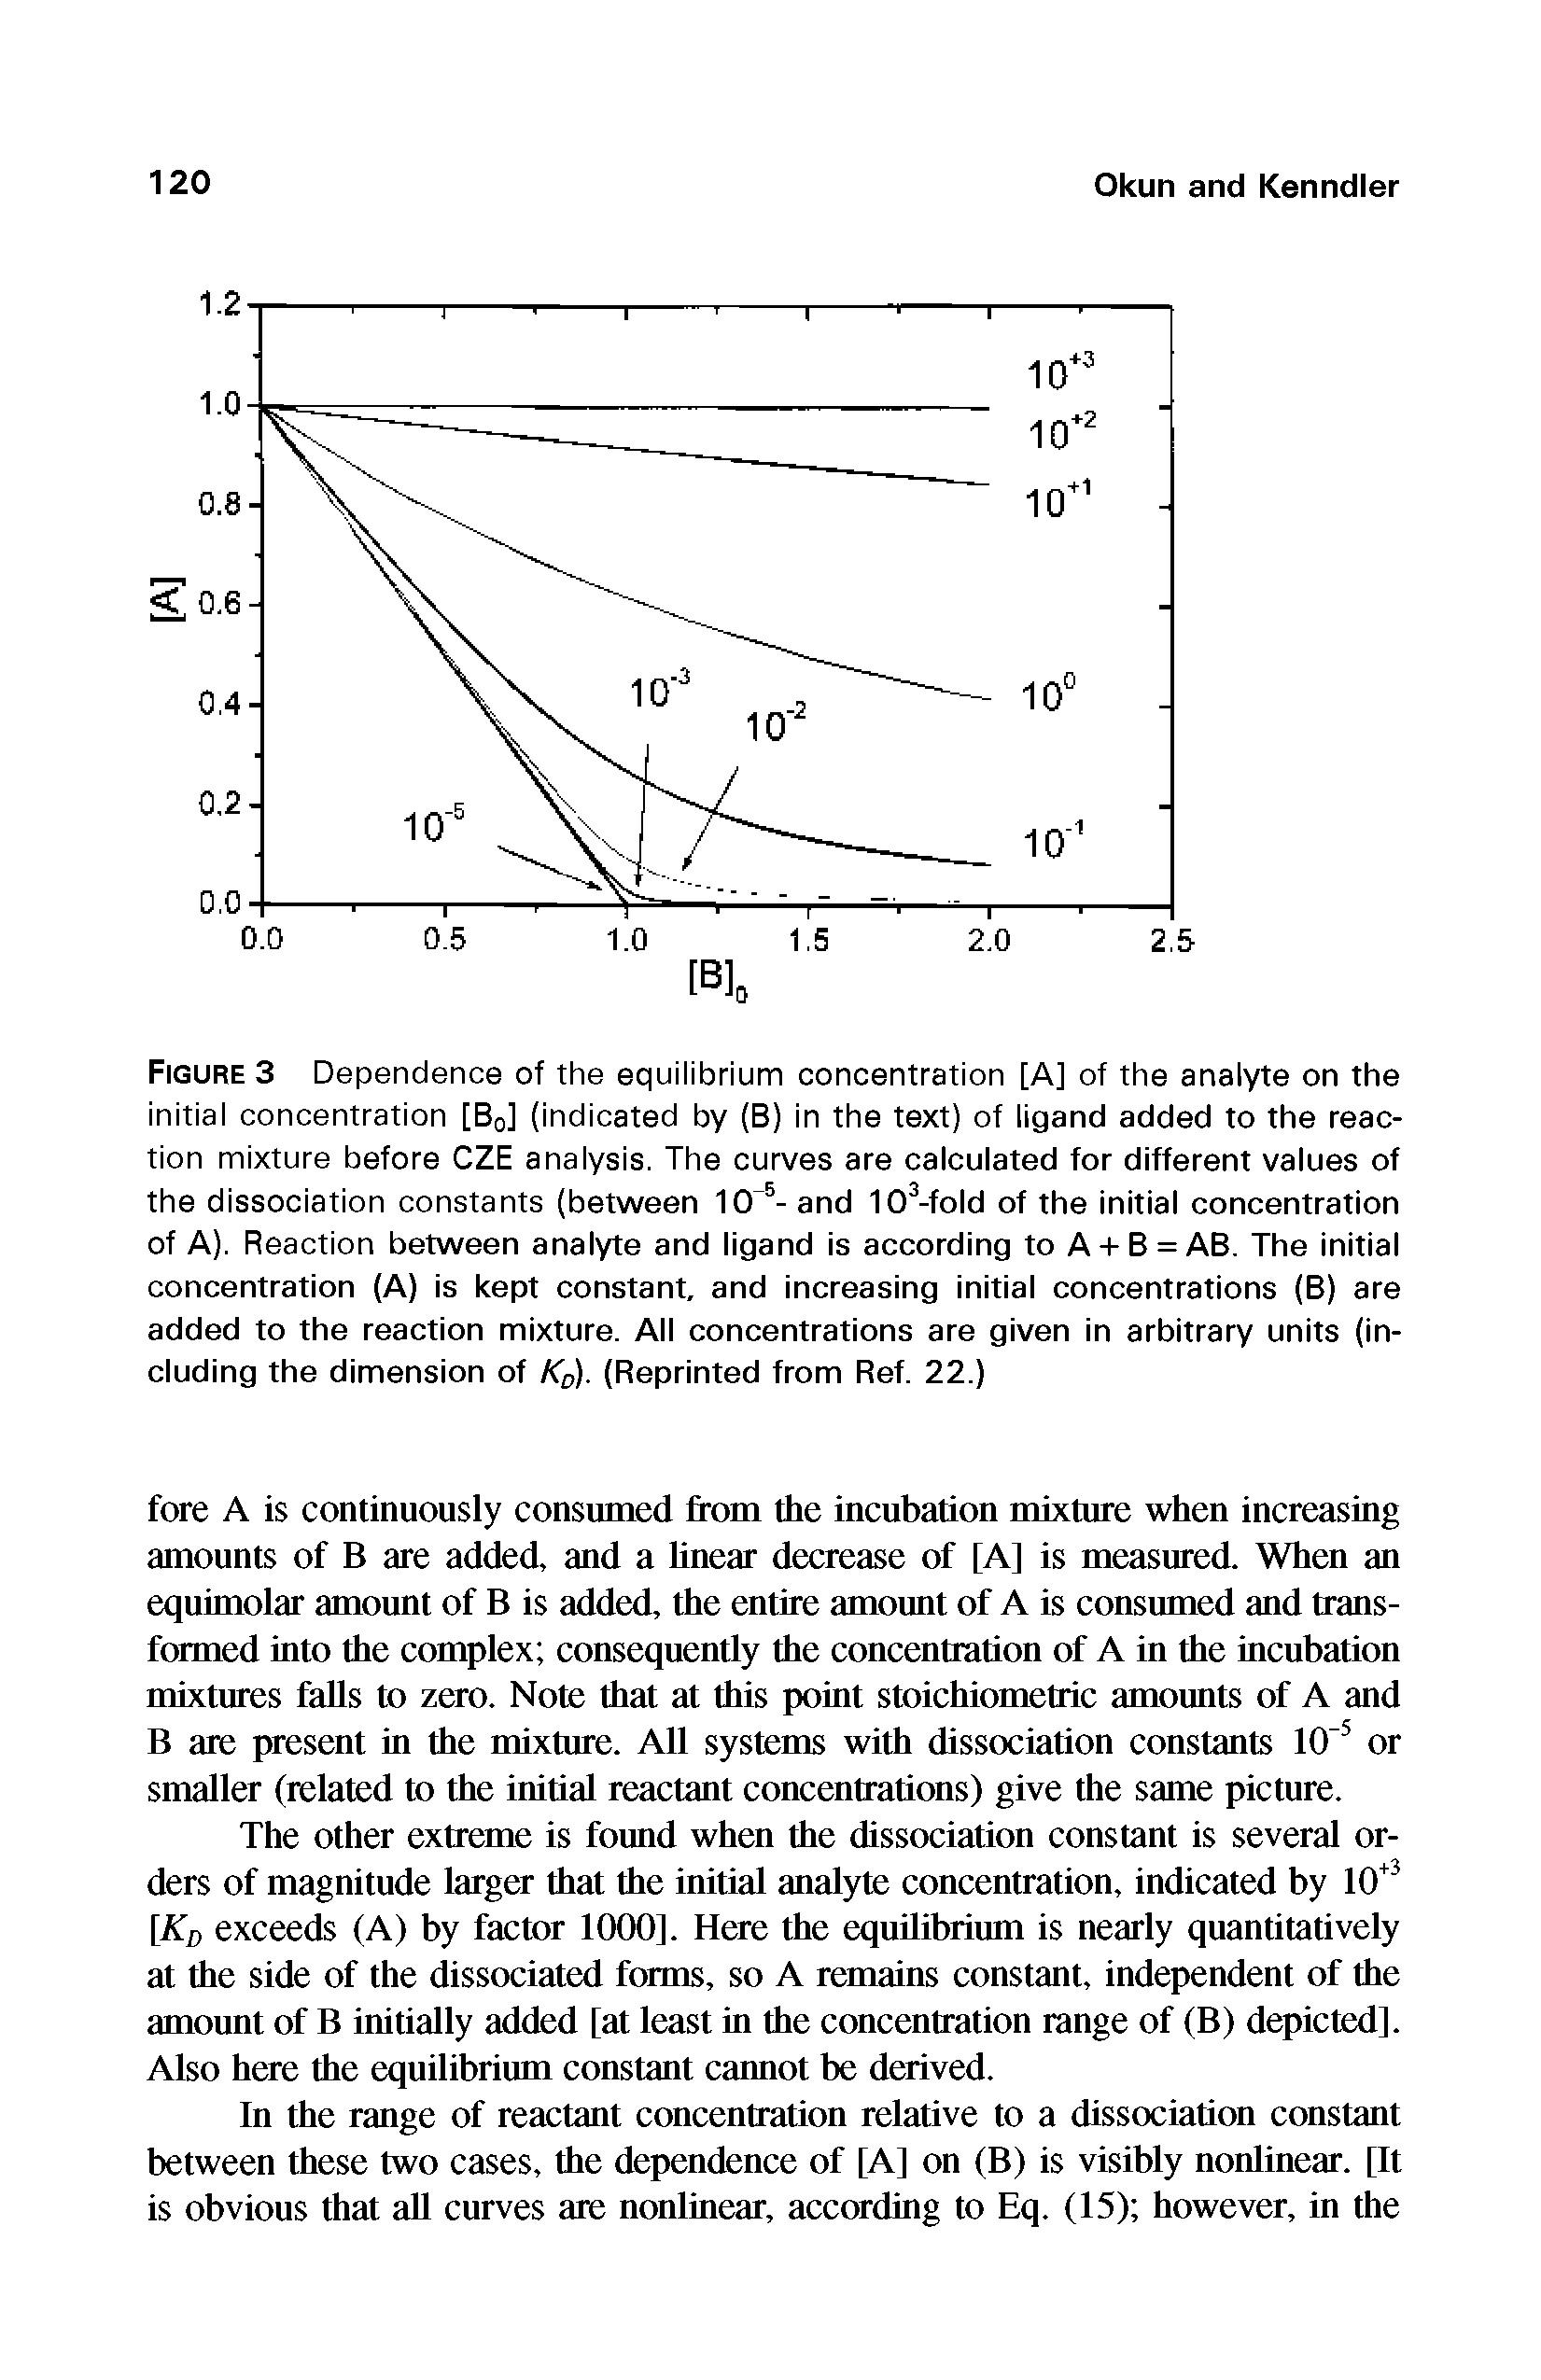 Figure 3 Dependence of the equilibrium concentration [A] of the analyte on the initial concentration [B0] (indicated by (B) in the text) of ligand added to the reaction mixture before CZE analysis. The curves are calculated for different values of the dissociation constants (between 1CT5- and 103-fold of the initial concentration of A). Reaction between analyte and ligand is according to A + B = AB. The initial concentration (A) is kept constant, and increasing initial concentrations (B) are added to the reaction mixture. All concentrations are given in arbitrary units (including the dimension of KD). (Reprinted from Ref. 22.)...